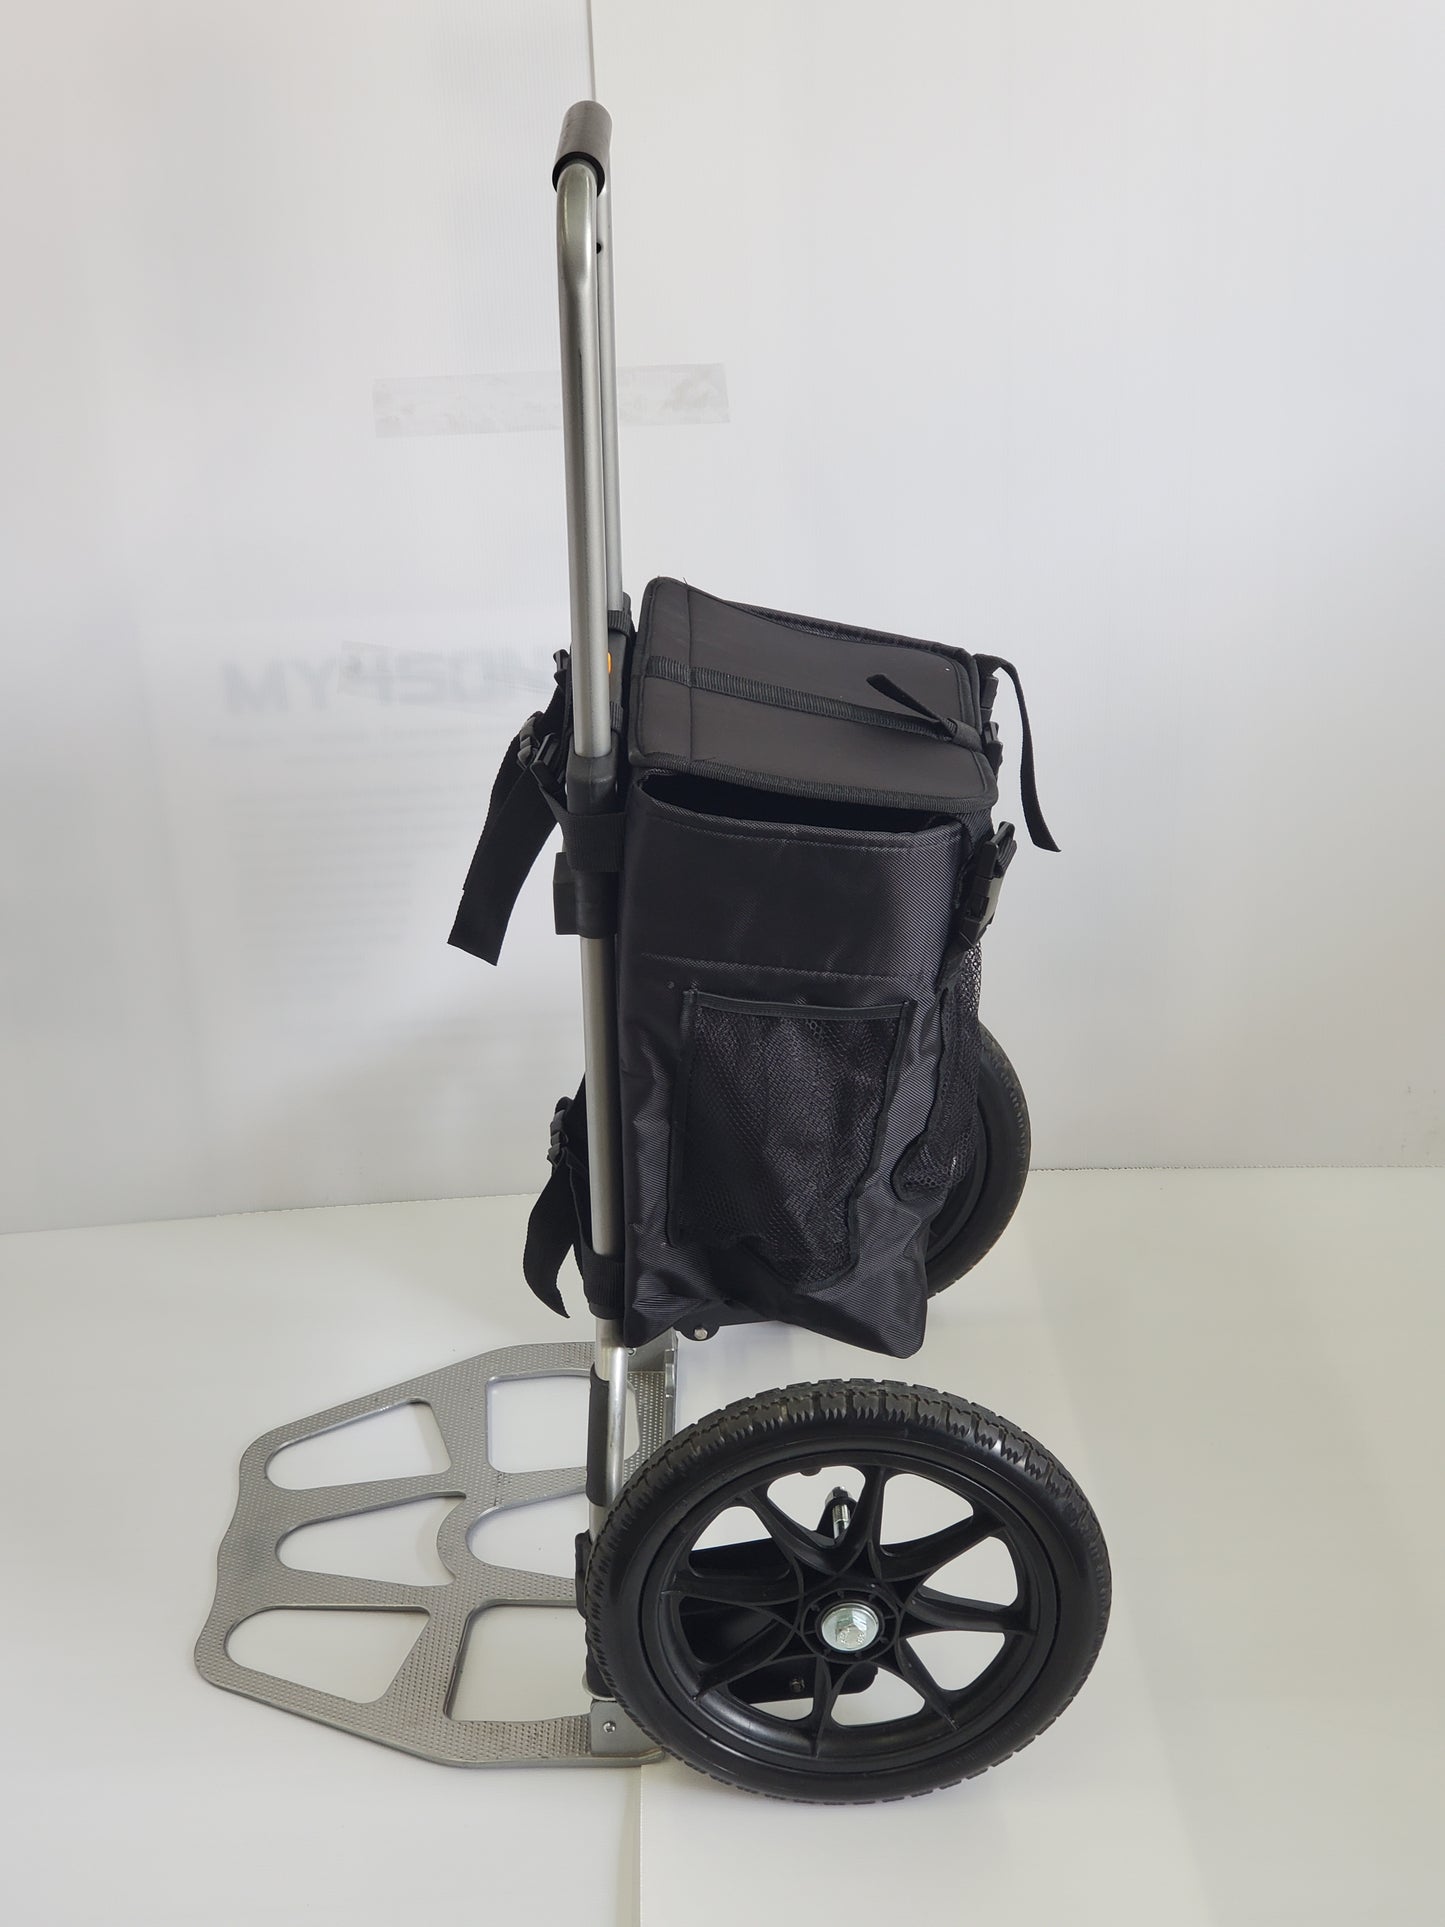 M4 Platinum with Monster Wheels #1 Rated M4 + 15 Foot Hose, Spray Pistol, Heavy Duty Super Compact Folding Hand Truck With 14 inch Wheels